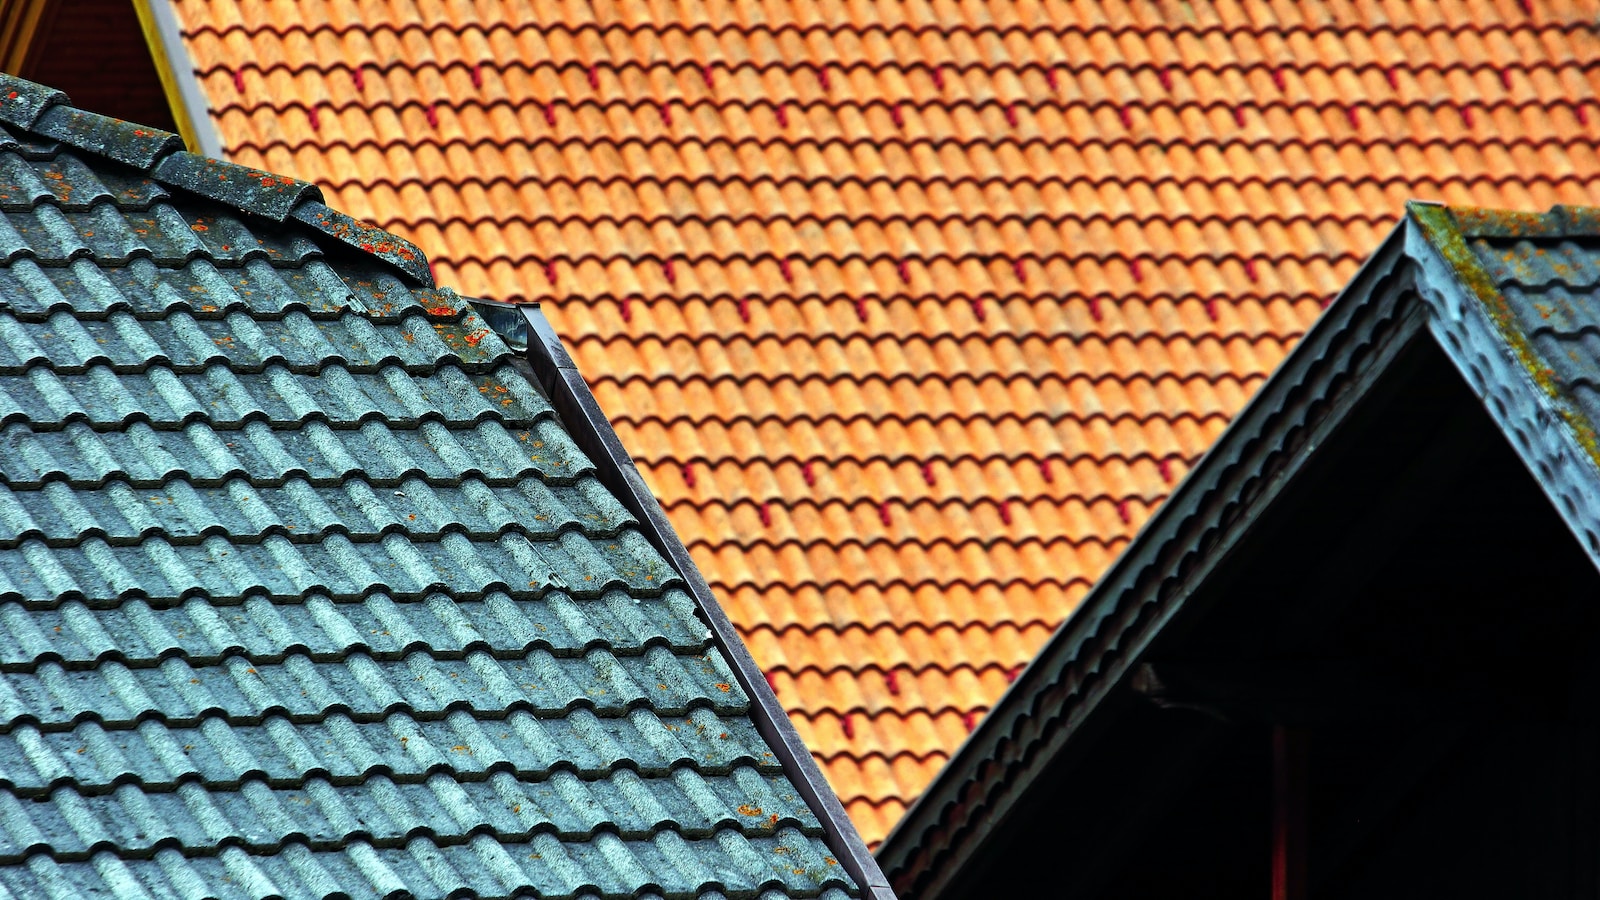 Harness the Sun: The Power and Potential of Solar Roofs